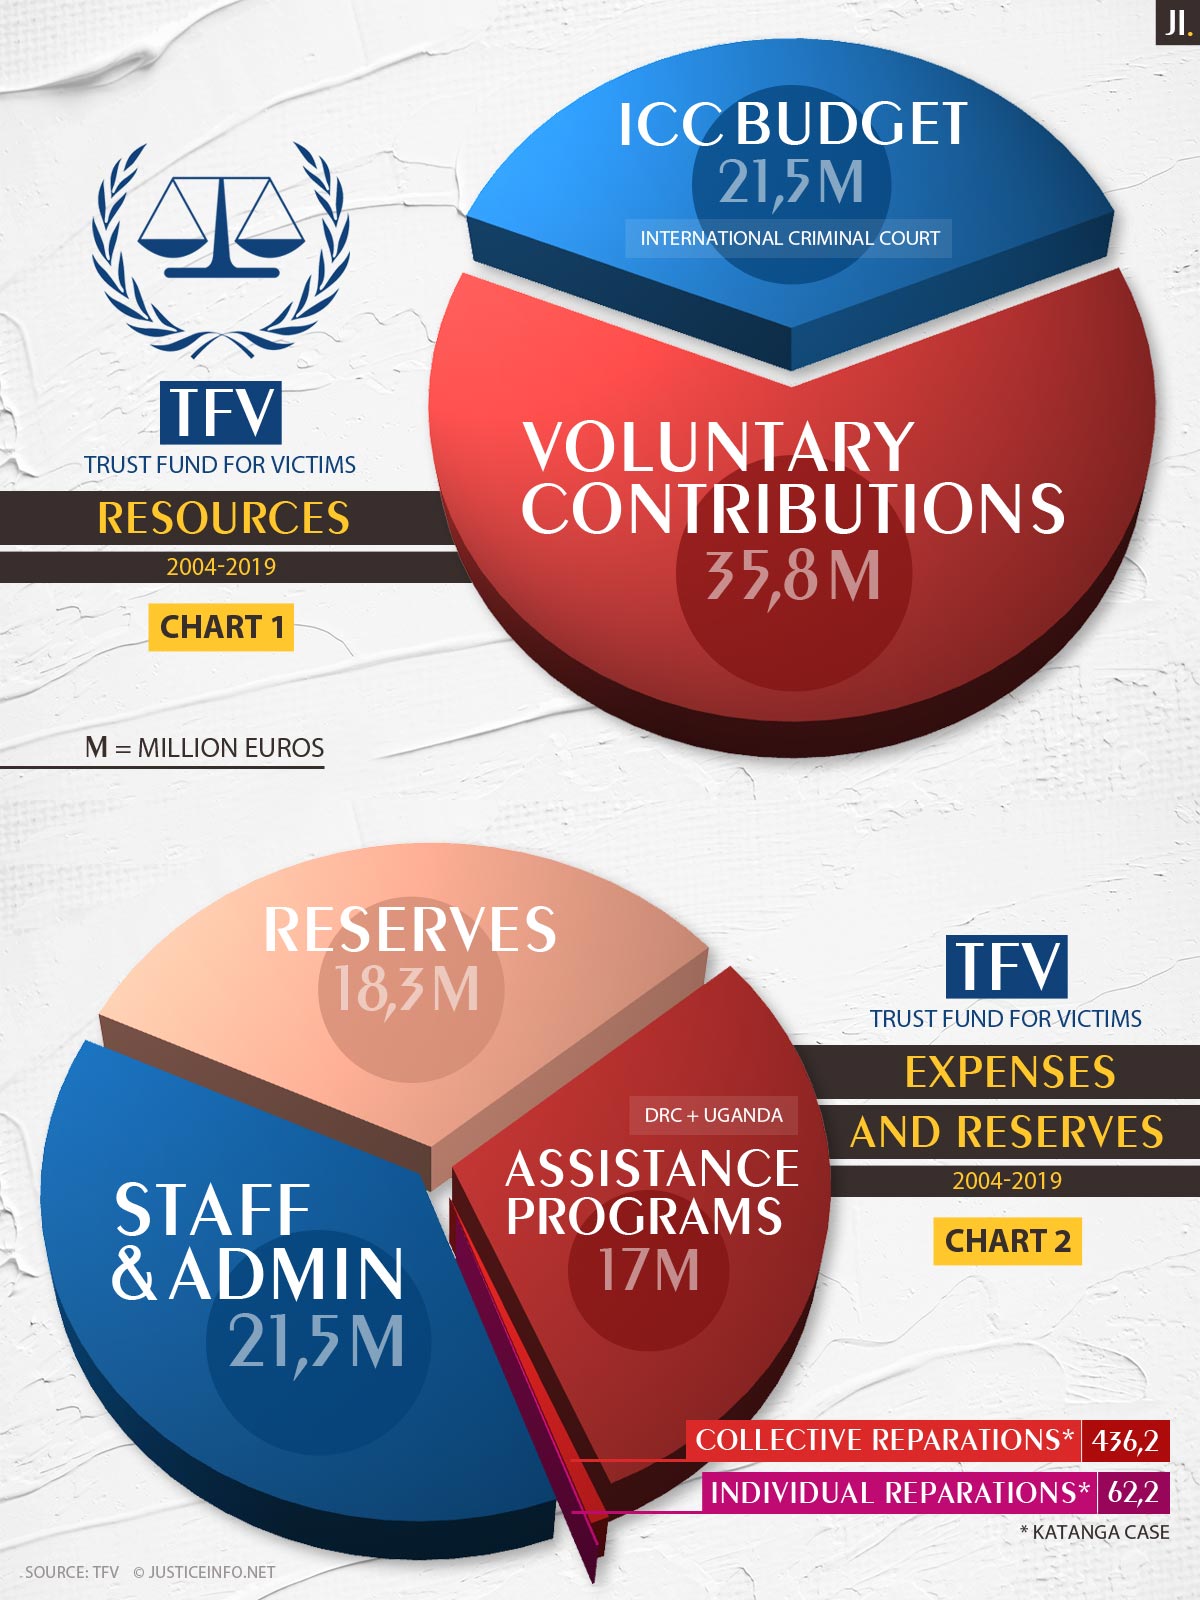 ICC Trust Fund for Victims (TFV) chart